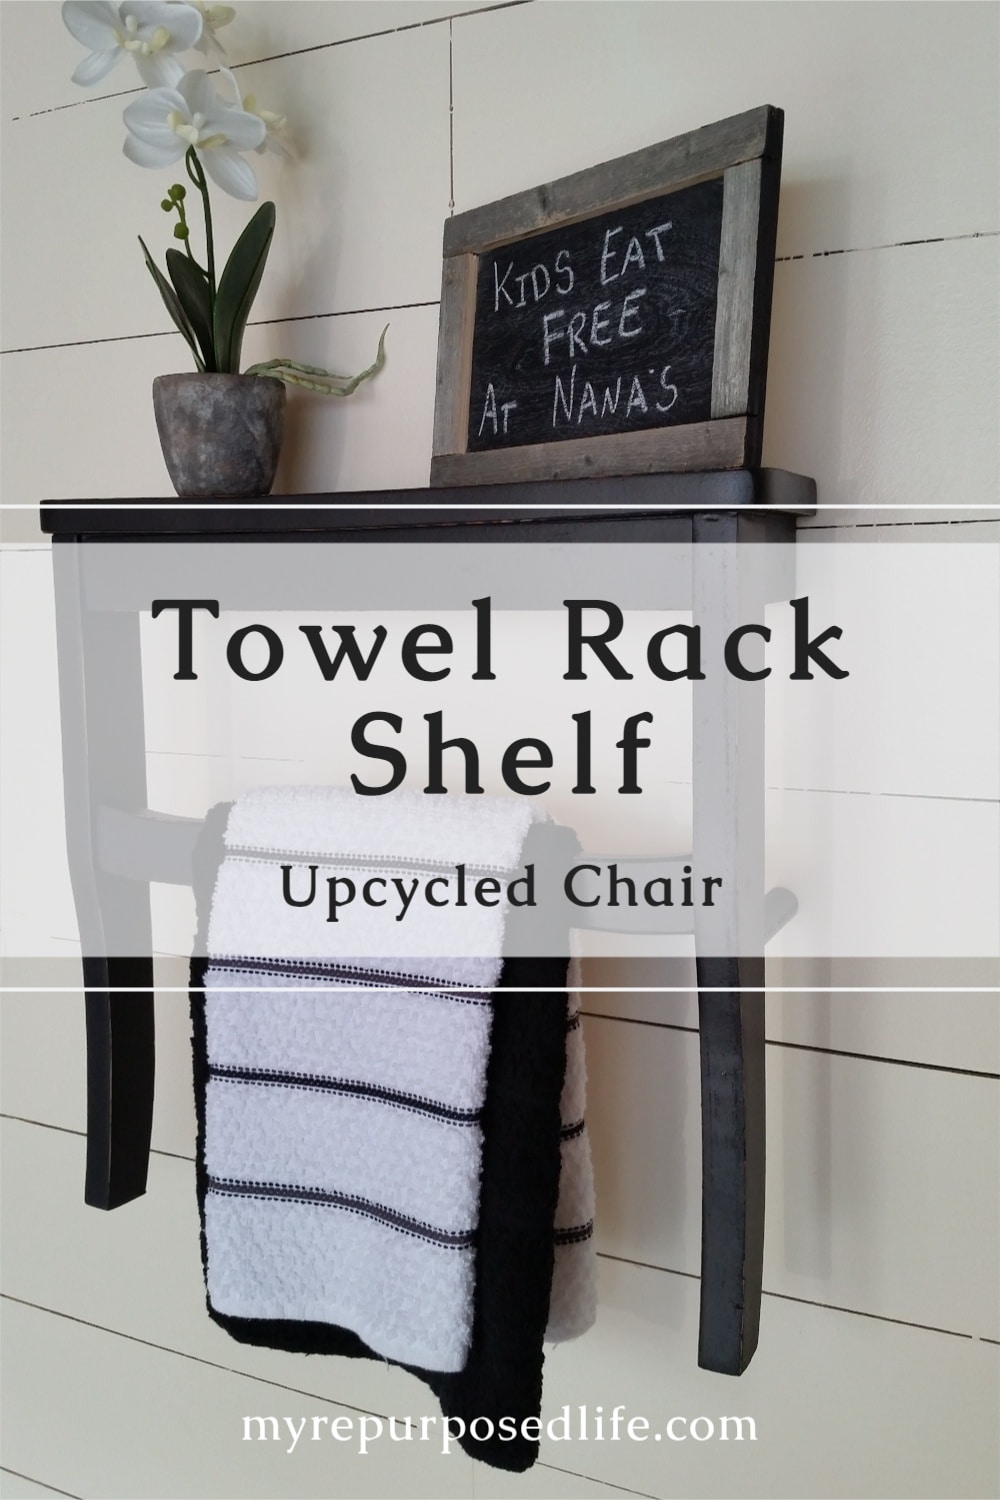 Using an old chair I'll show you how to make a fun, unique wall shelf using the chair seat. Perfect for a guest bath or guest room. Shelf with a towel rack, so easy! #MyRepurposedLife #upcycle #chair #repurposed #shelf #towelrack via @repurposedlife